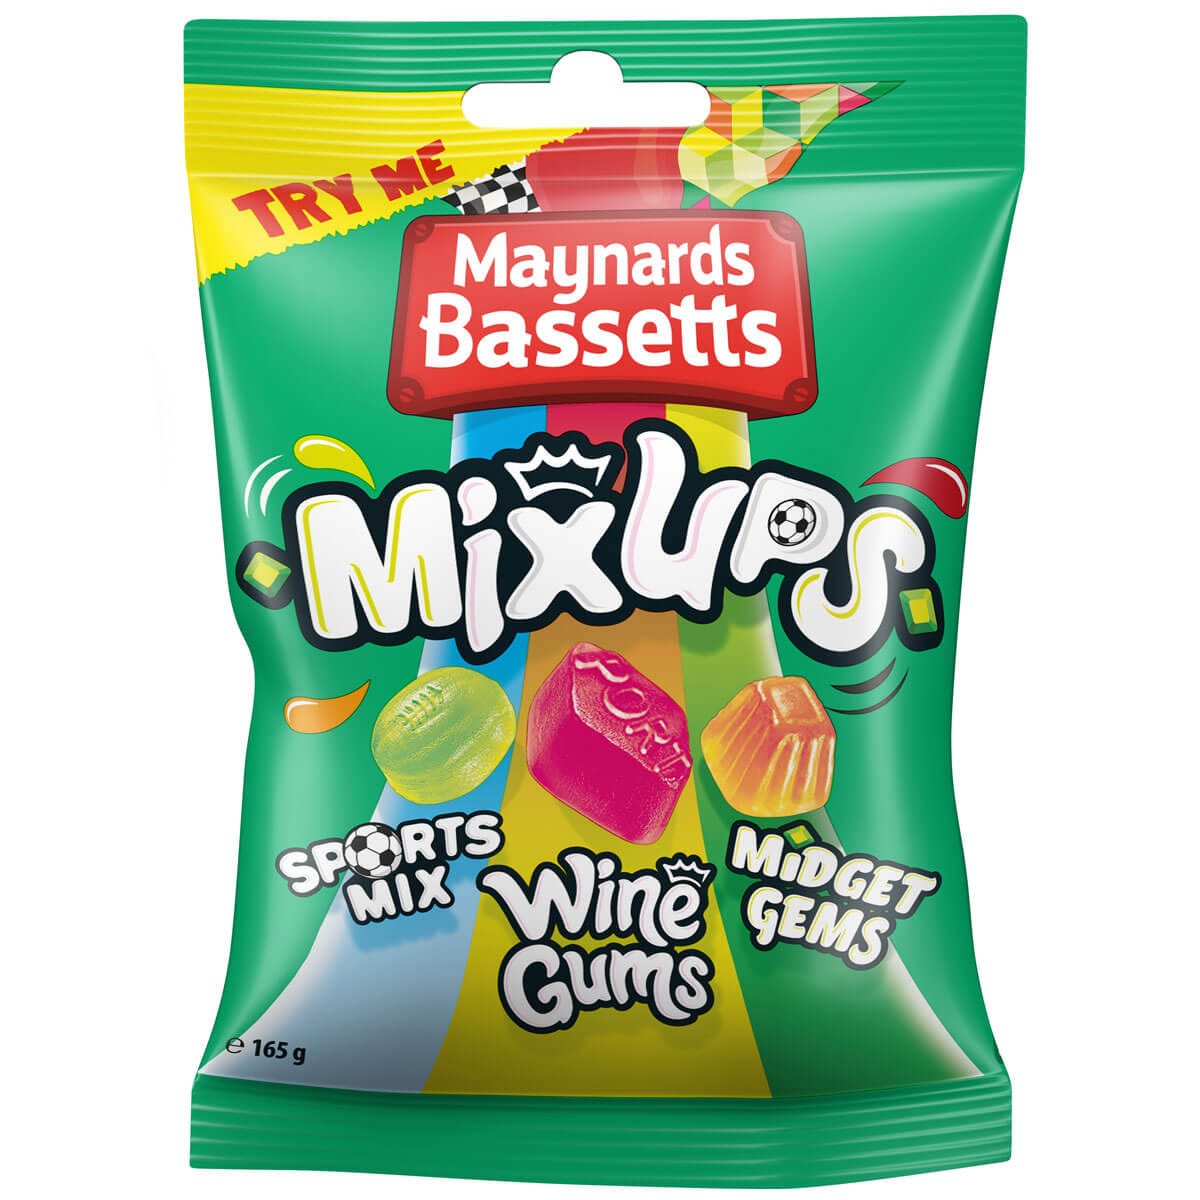 Picture of Maynards Bassetts Mix Ups Bag 165g